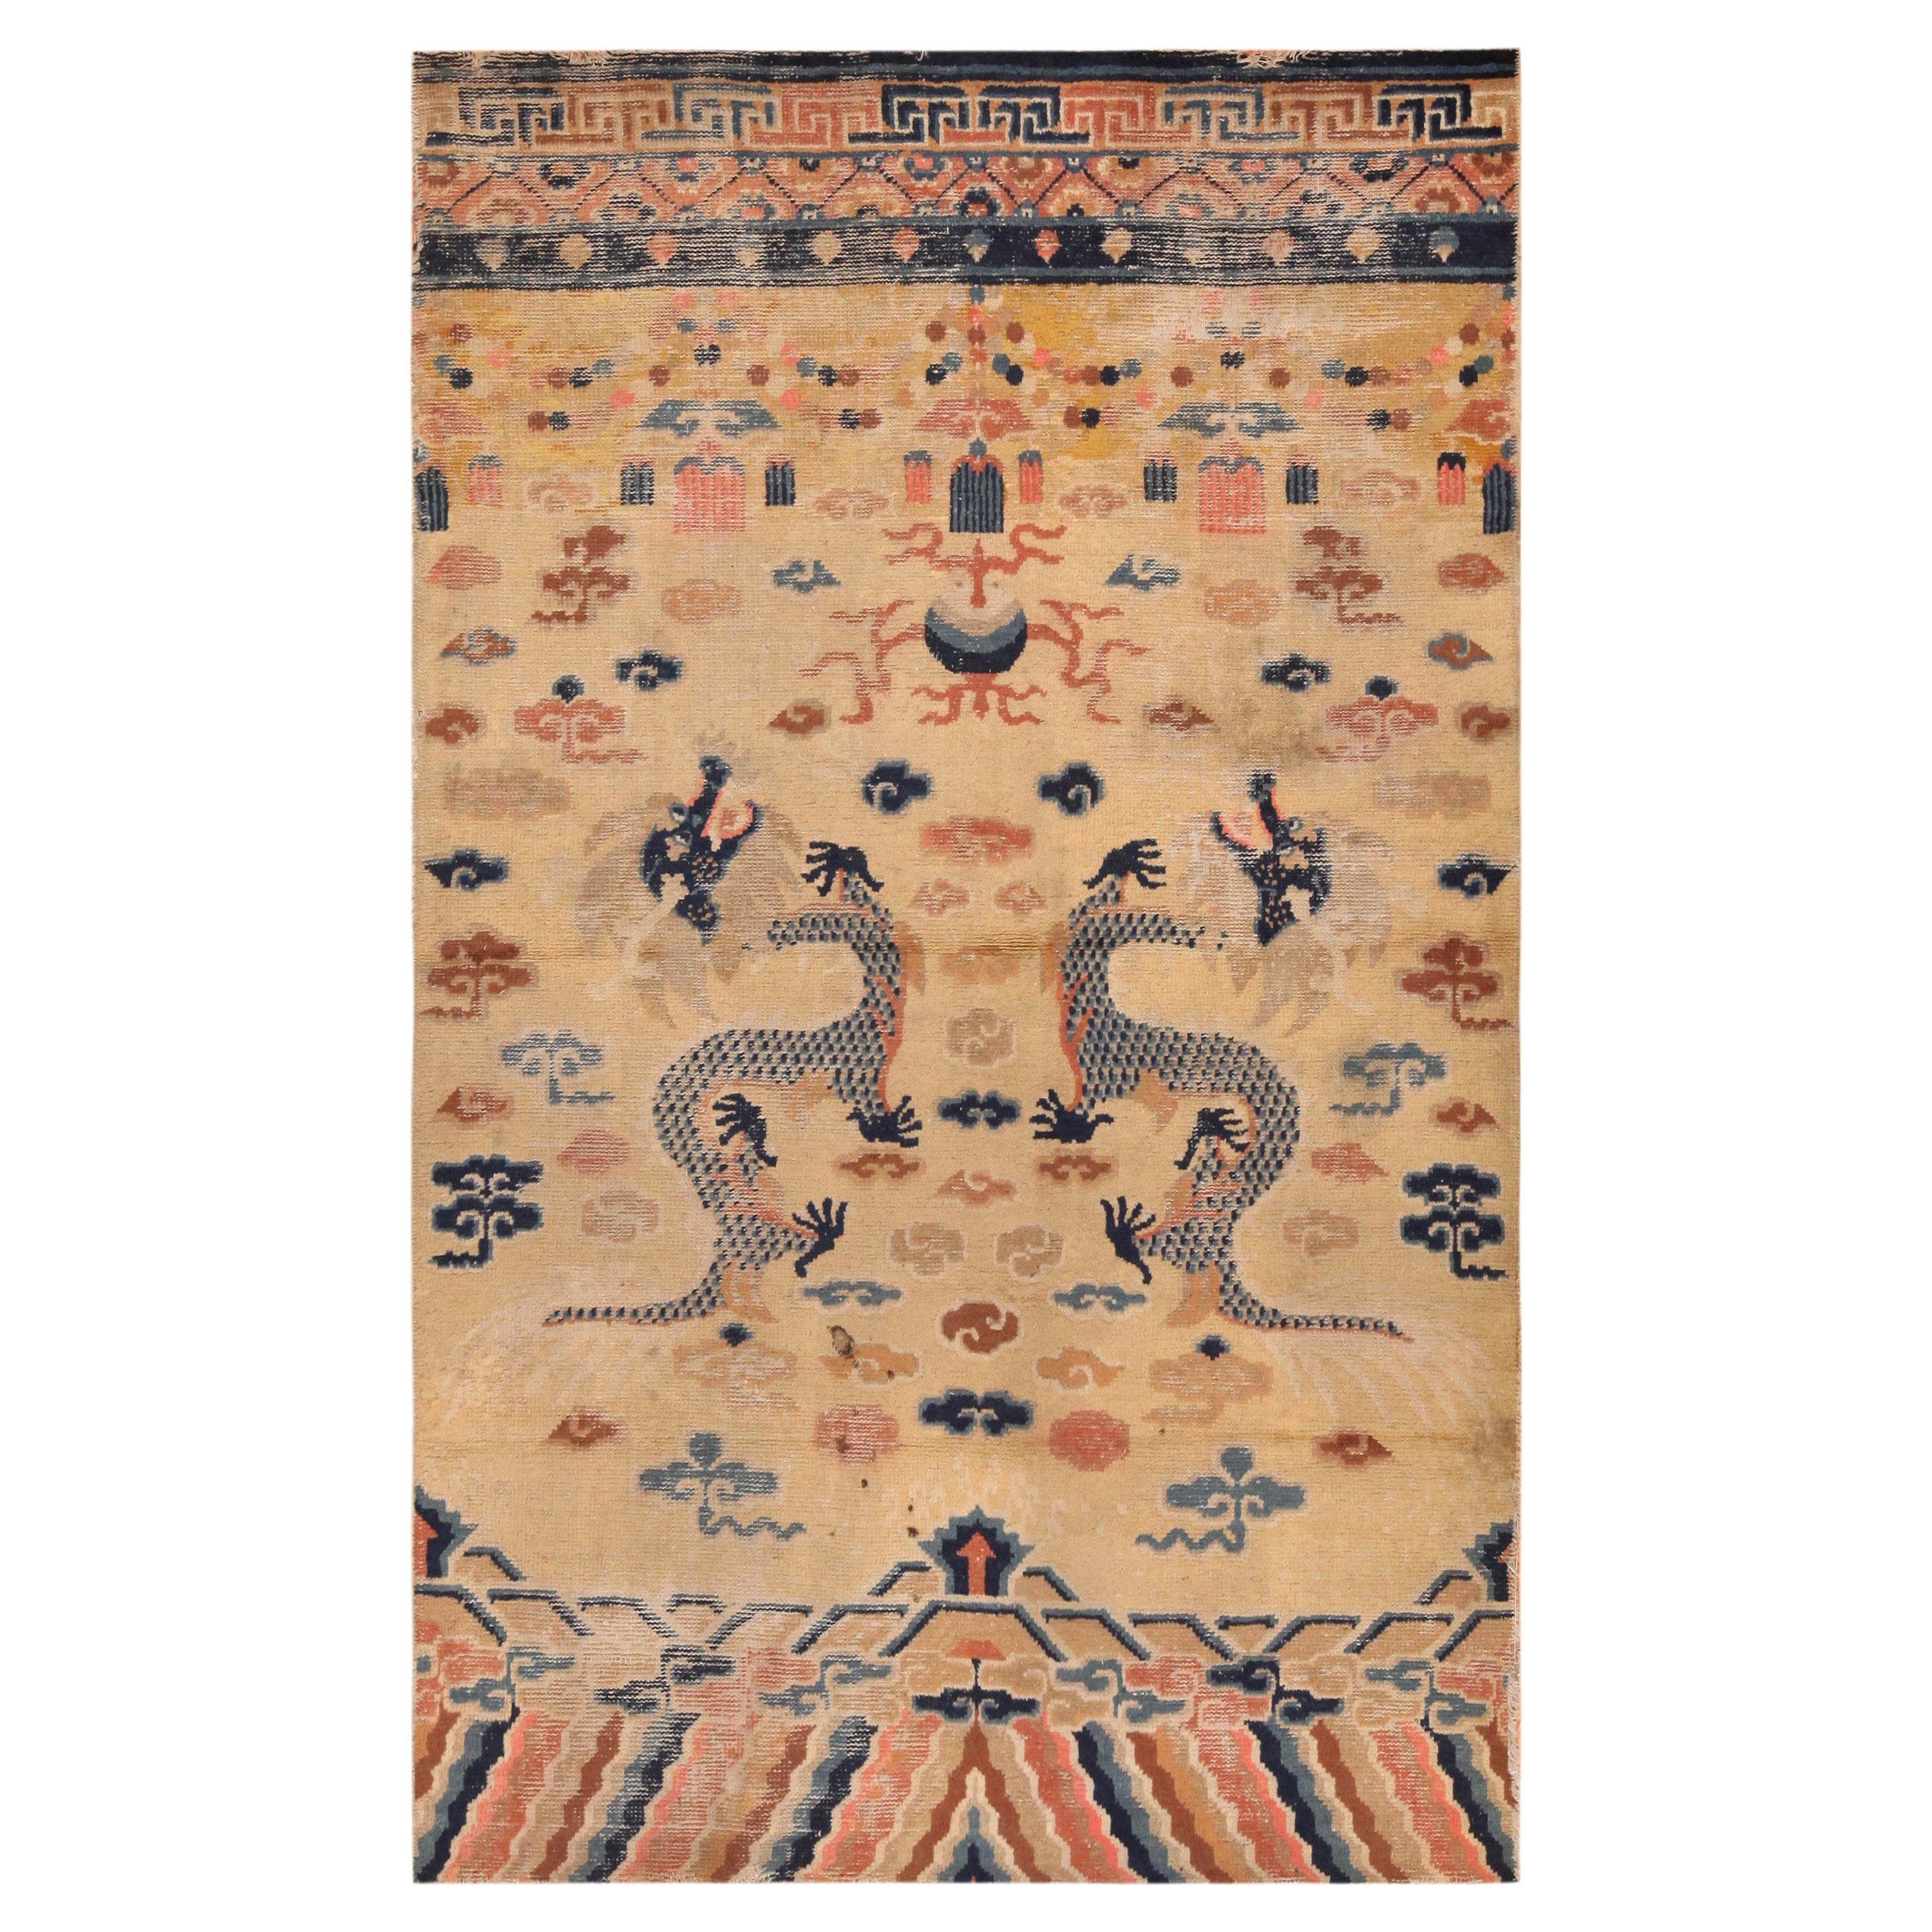 Antique Dragon Design Chinese Rug. 4 ft 4 in x 6 ft 10 in